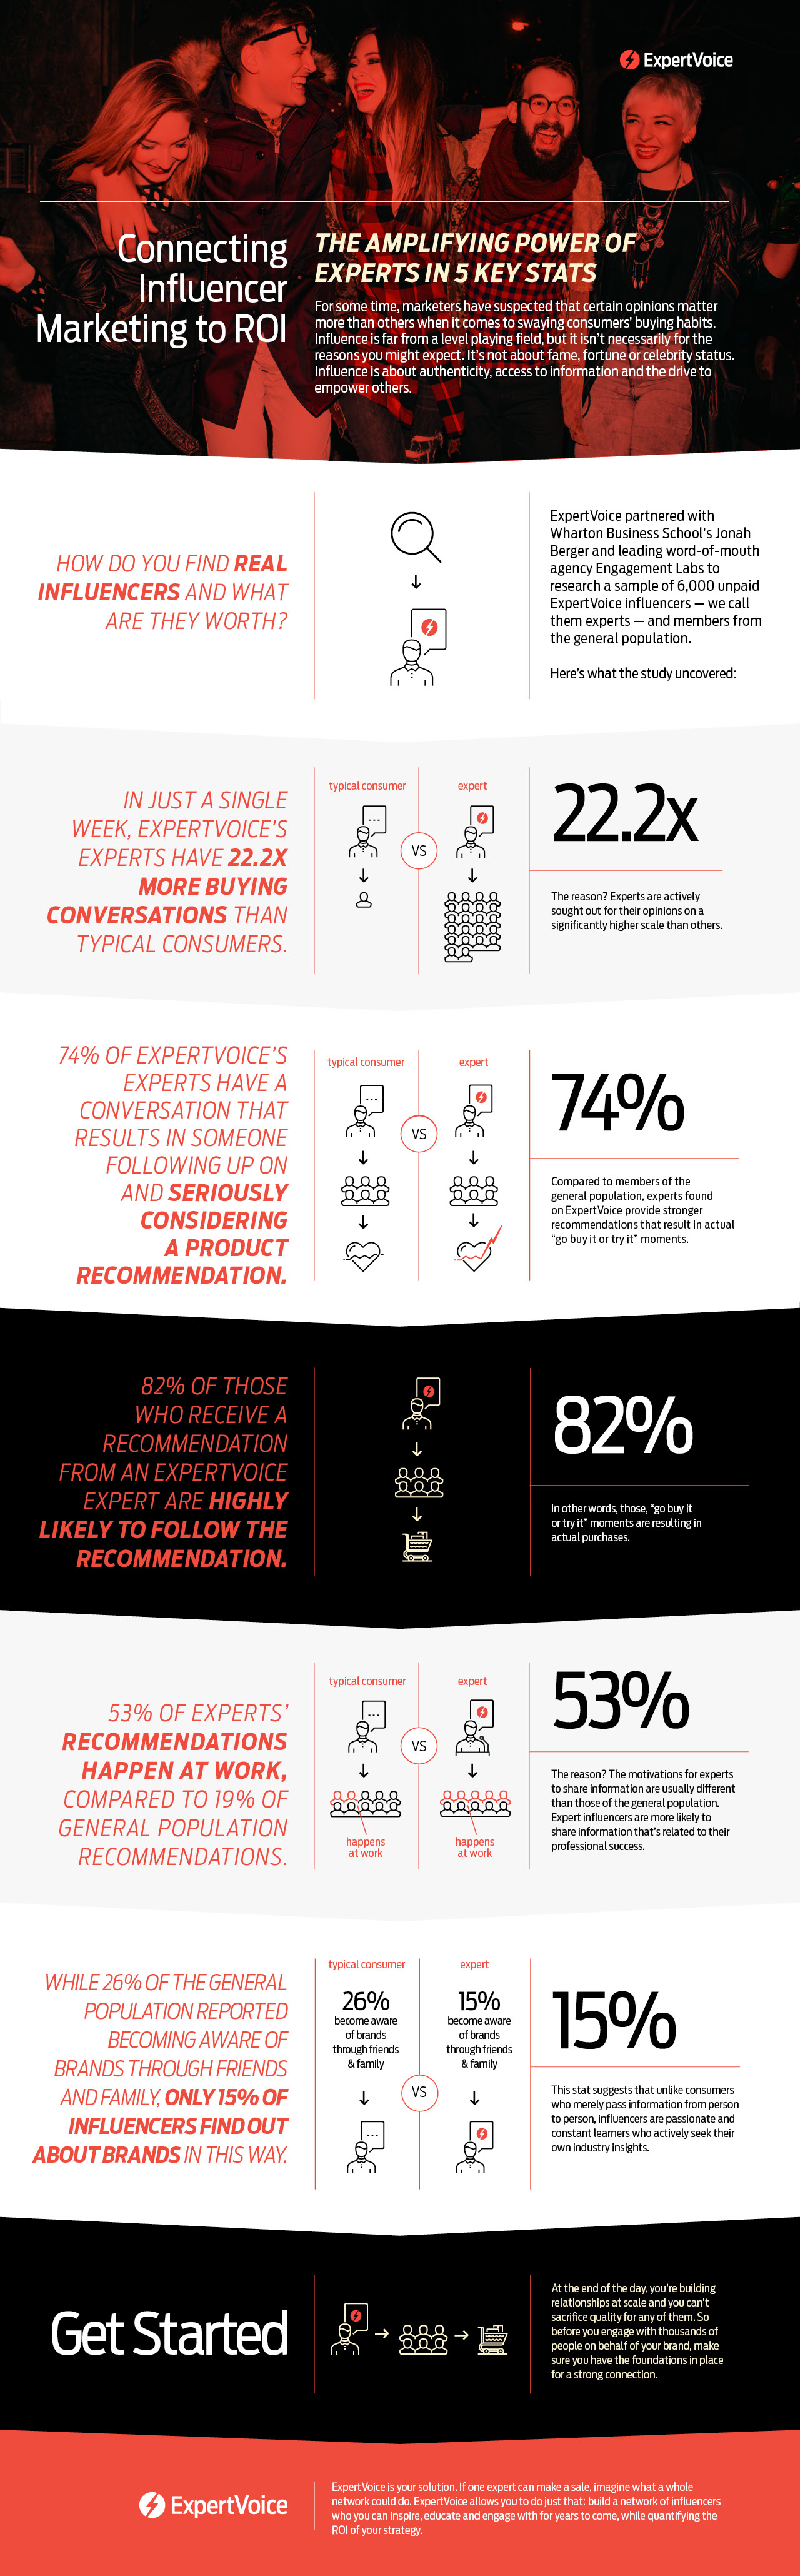 ExpertVoice_infographic_Connecting_Influencer_Marketing_to_ROI